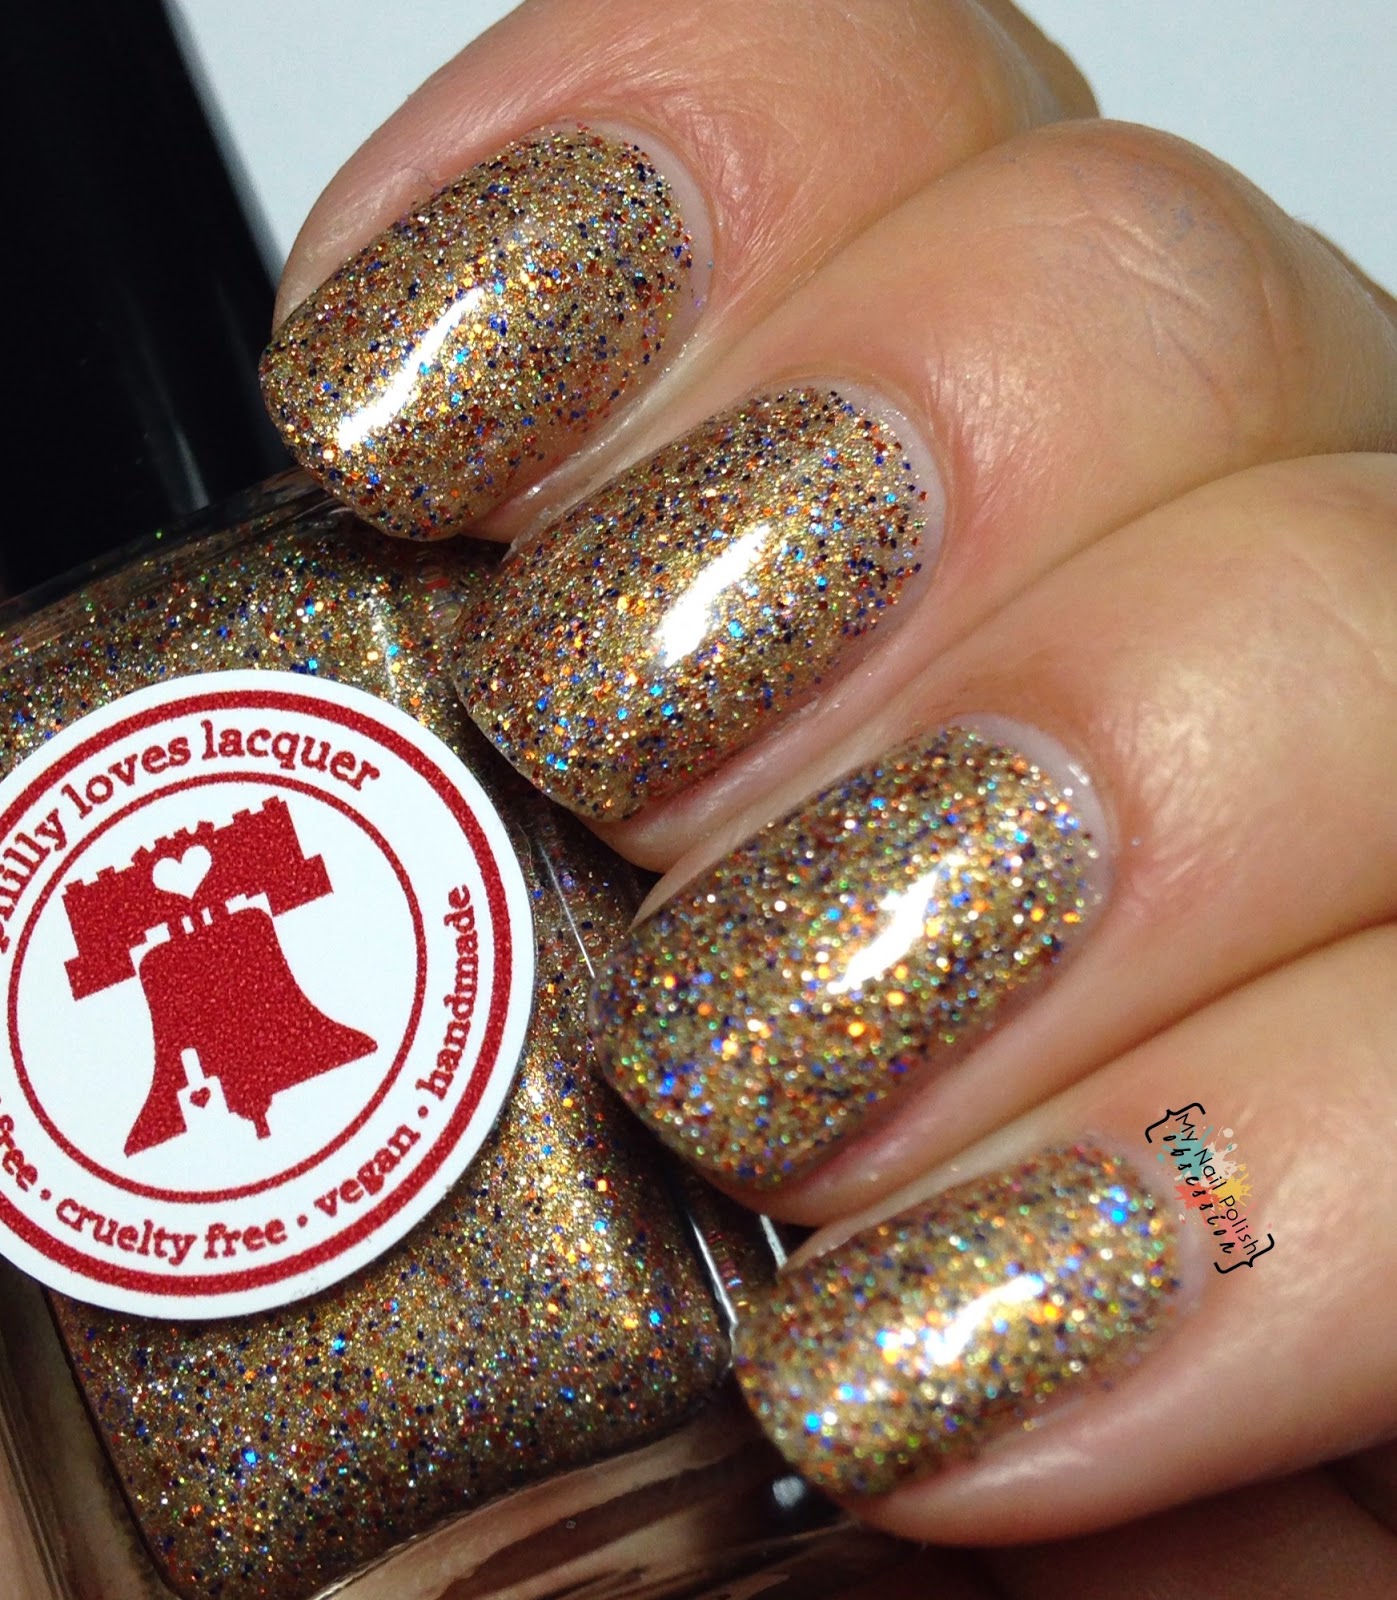 Philly Loves Lacquer SBP #110